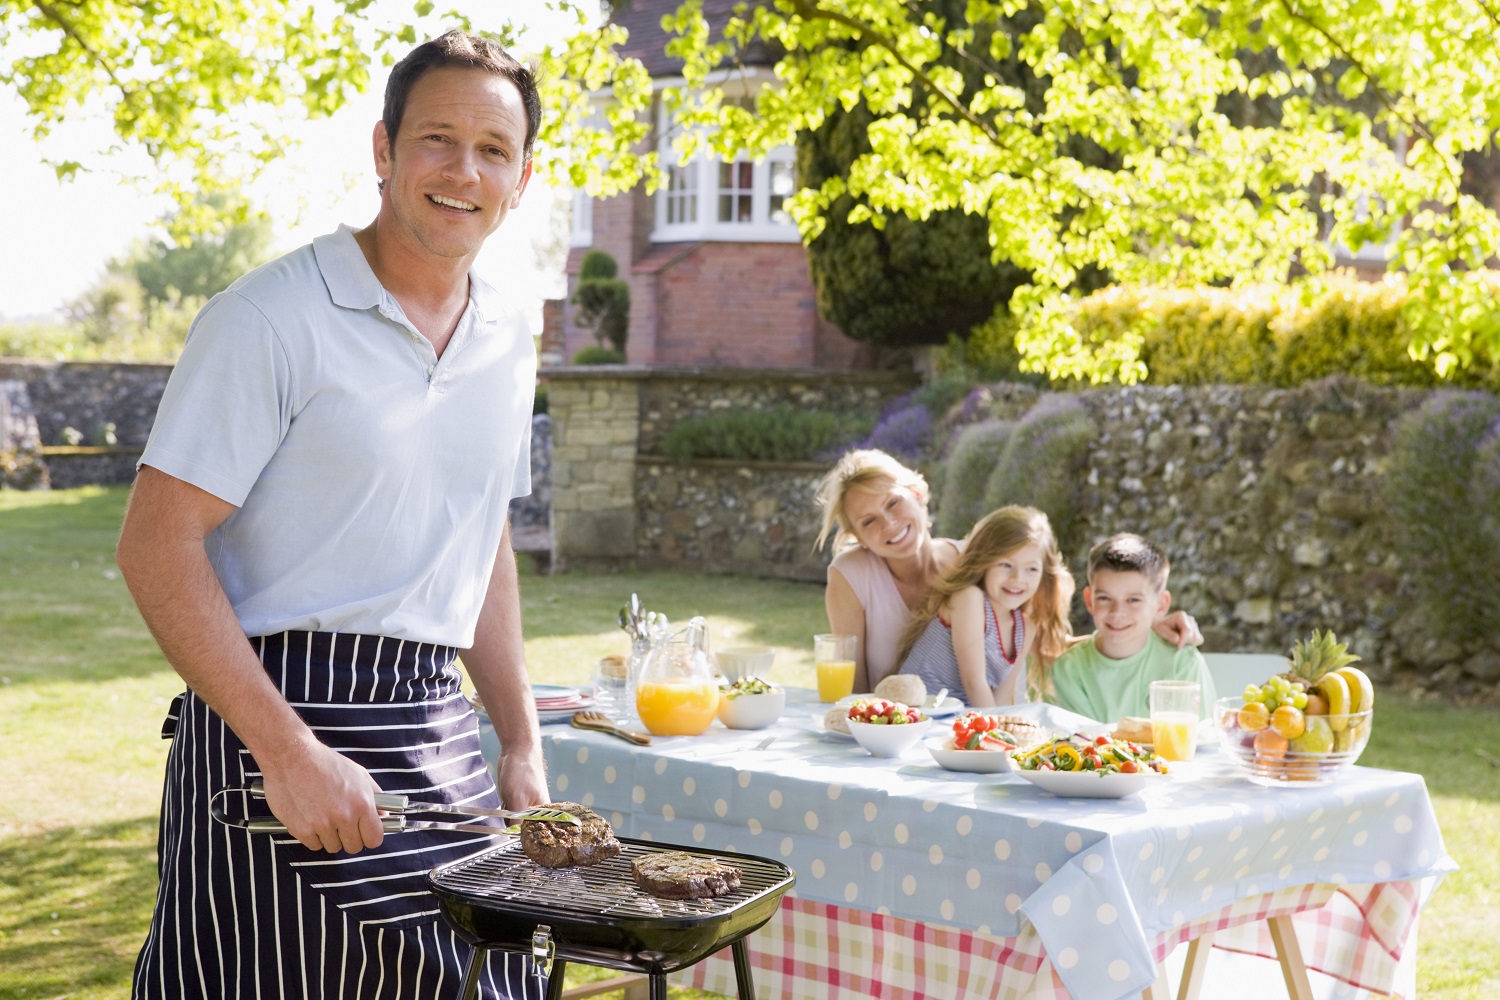 Take-home grocery sales in Ireland increased by 4.7% – BBQ season is on